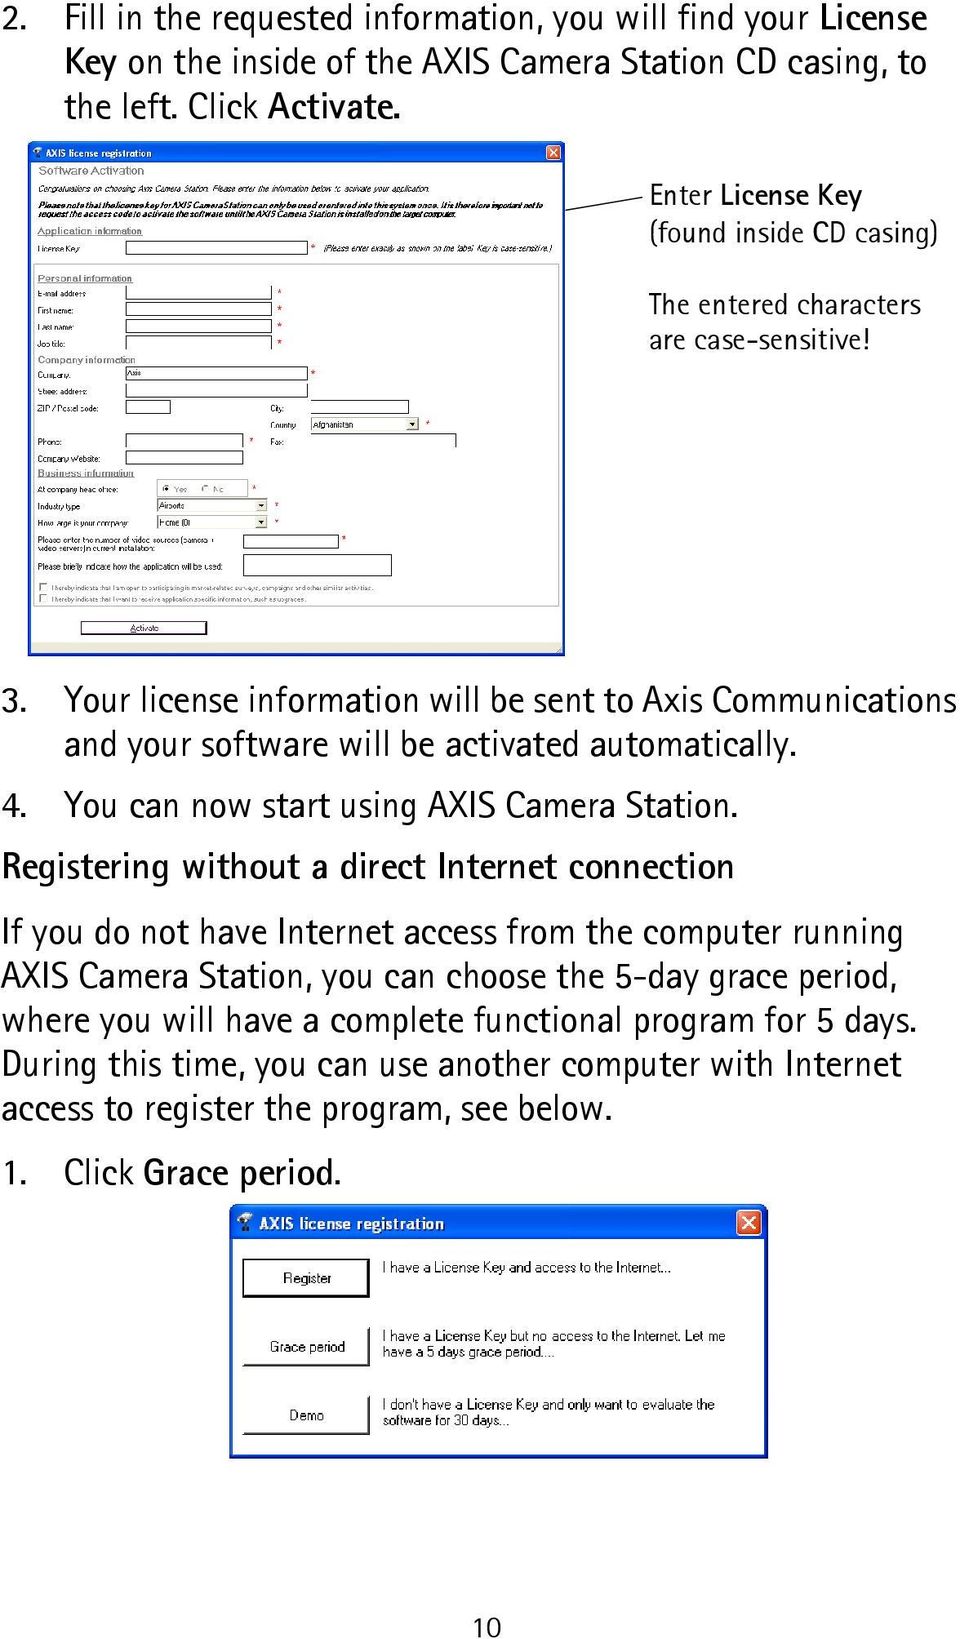 Your license information will be sent to Axis Communications and your software will be activated automatically. 4. You can now start using AXIS Camera Station.